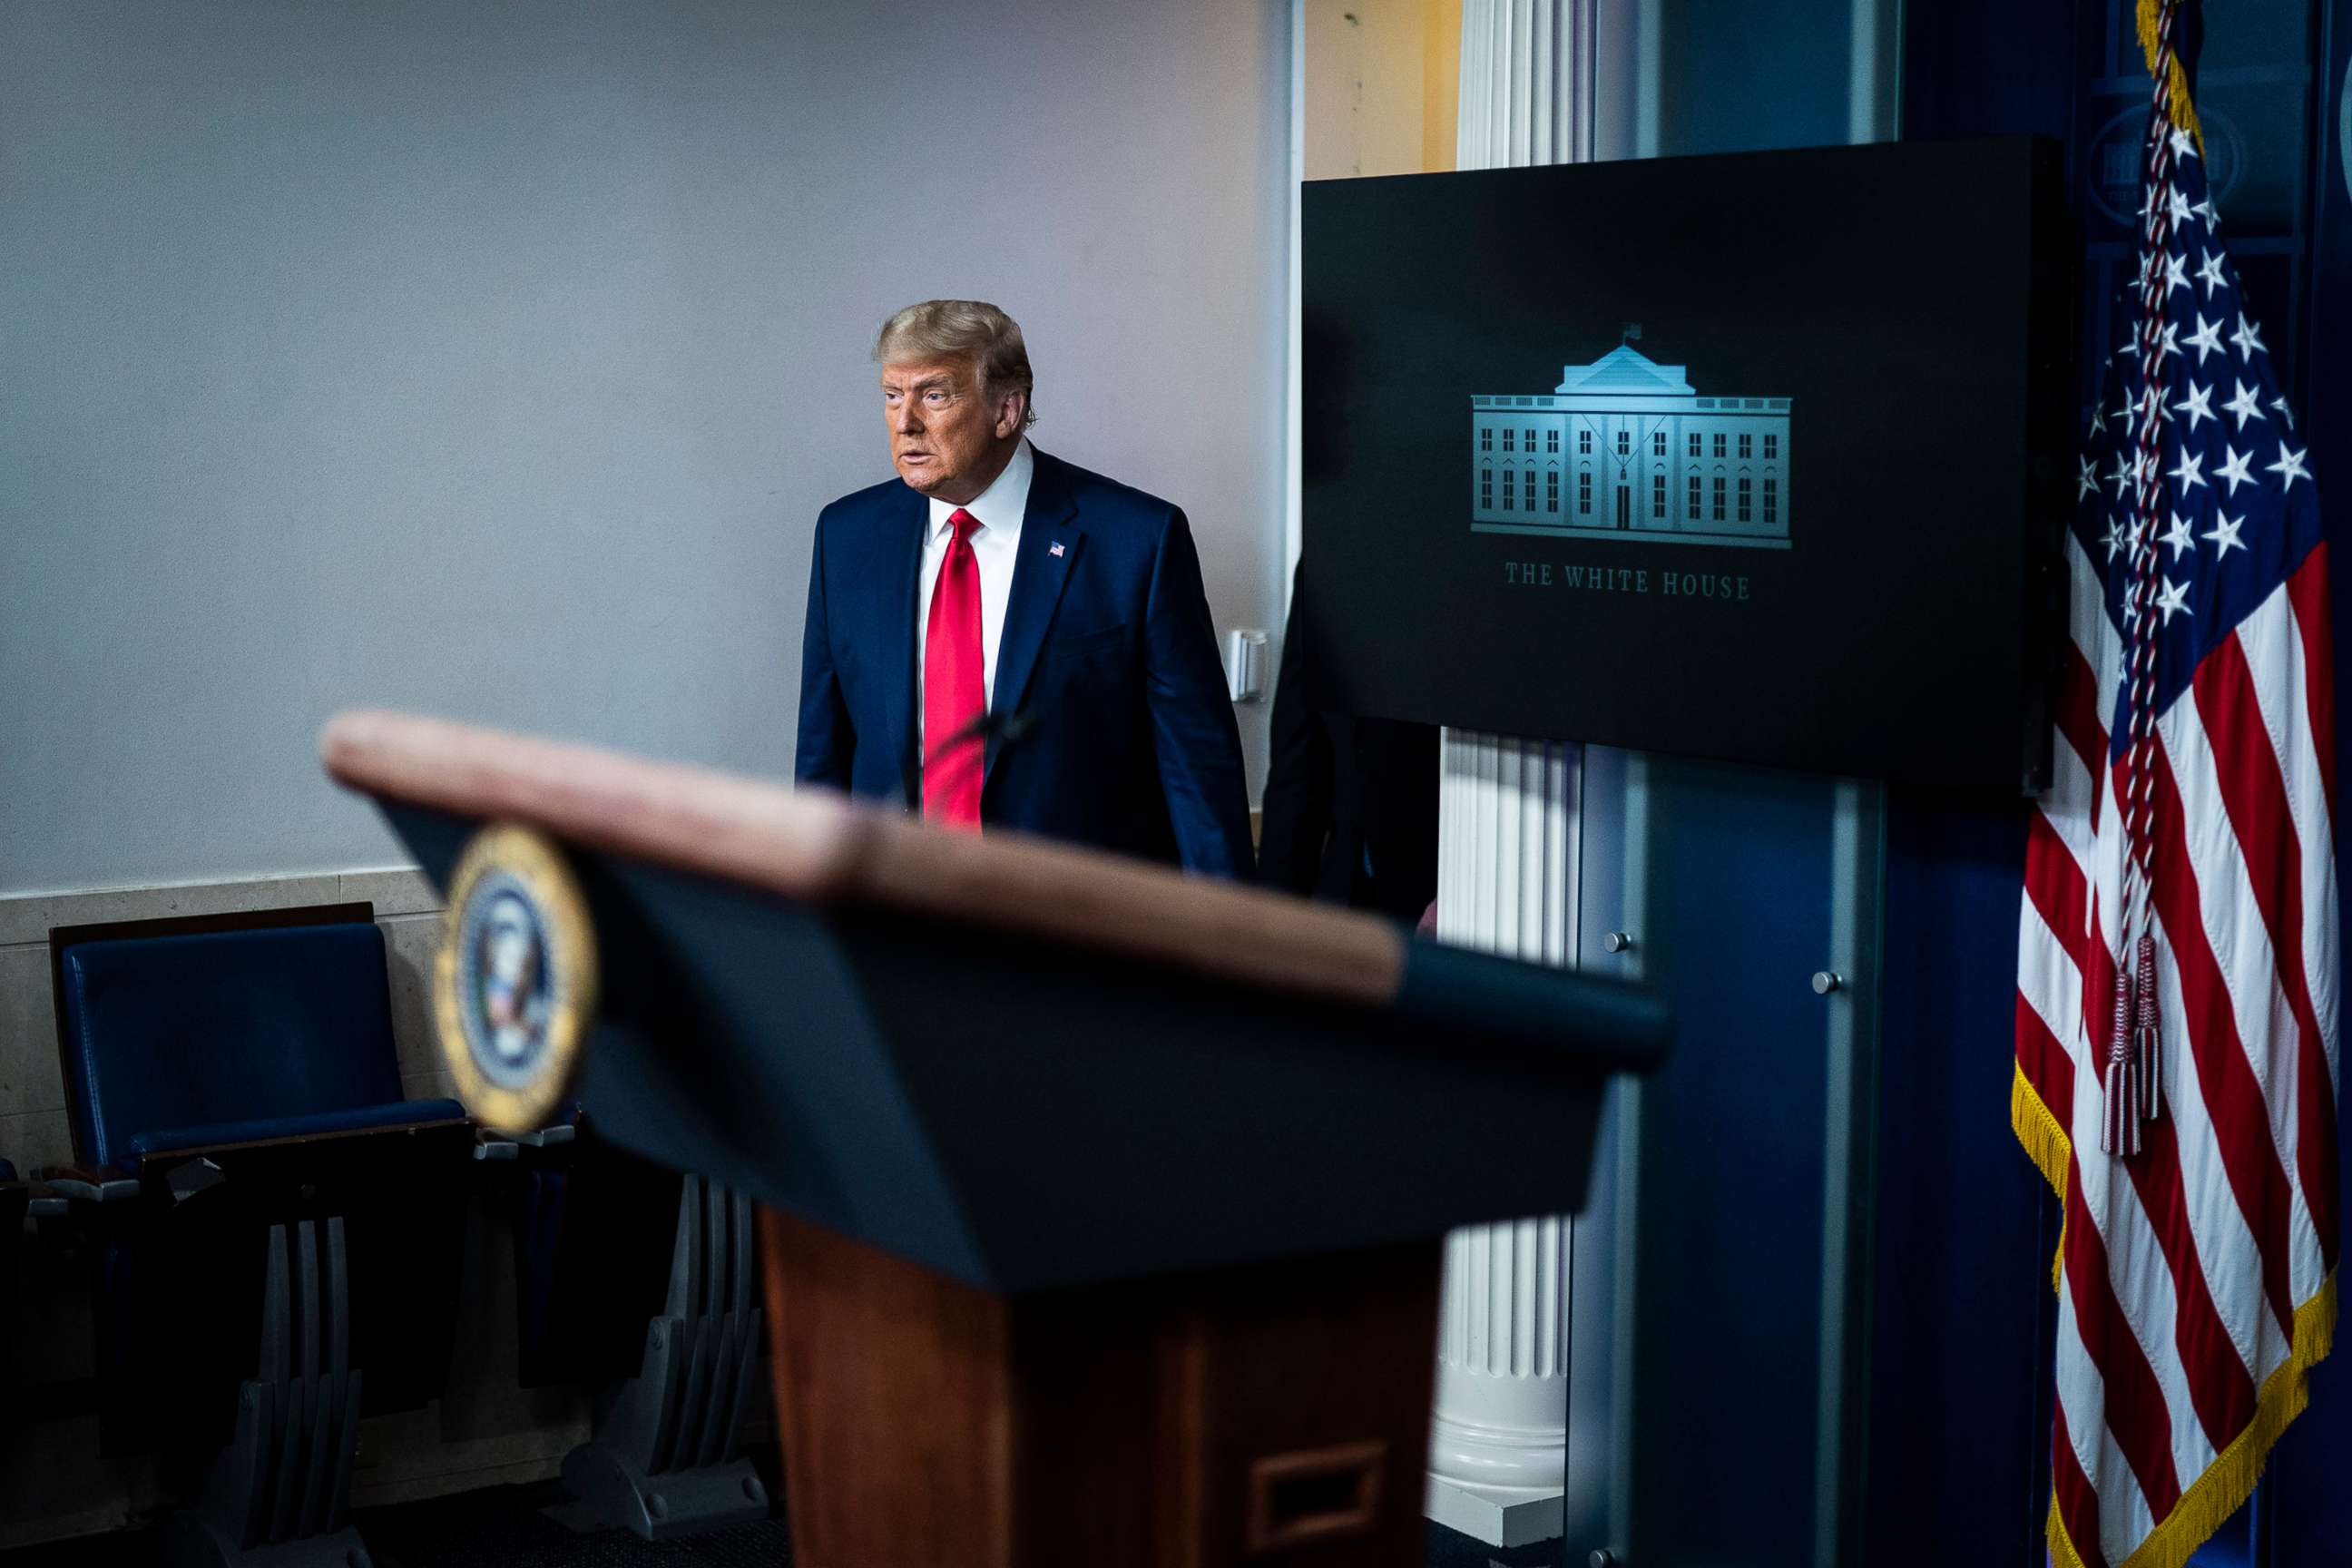 PHOTO: President Donald Trump arrives to speak in the James S. Brady Press Briefing Room at the White House , Nov 24, 2020.